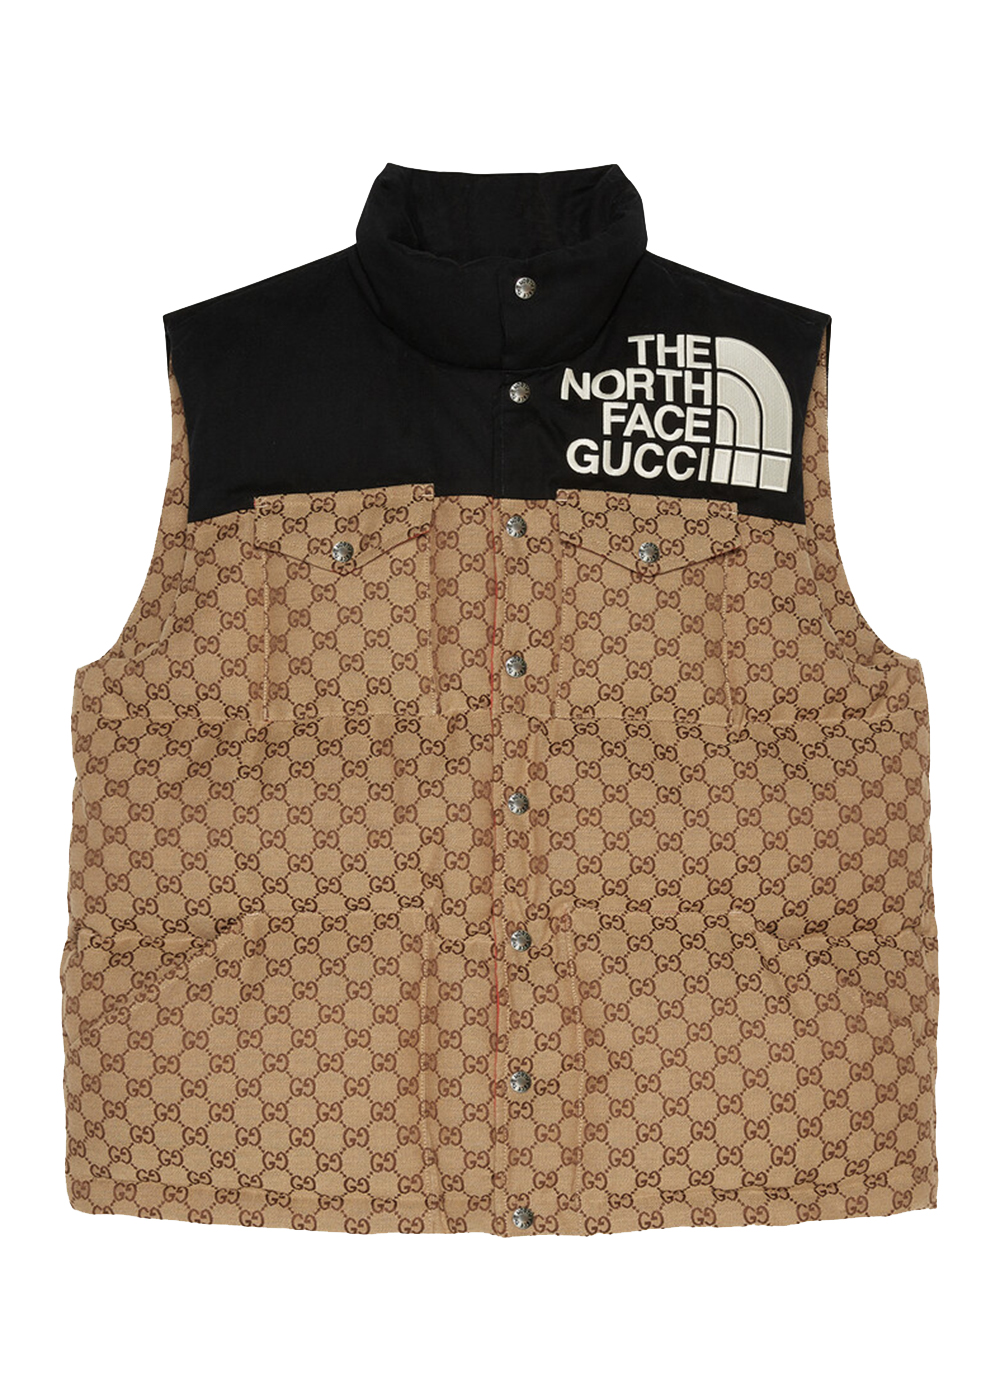 Gucci x The North Face Womens GG Padded Vest Black Ebony Beige